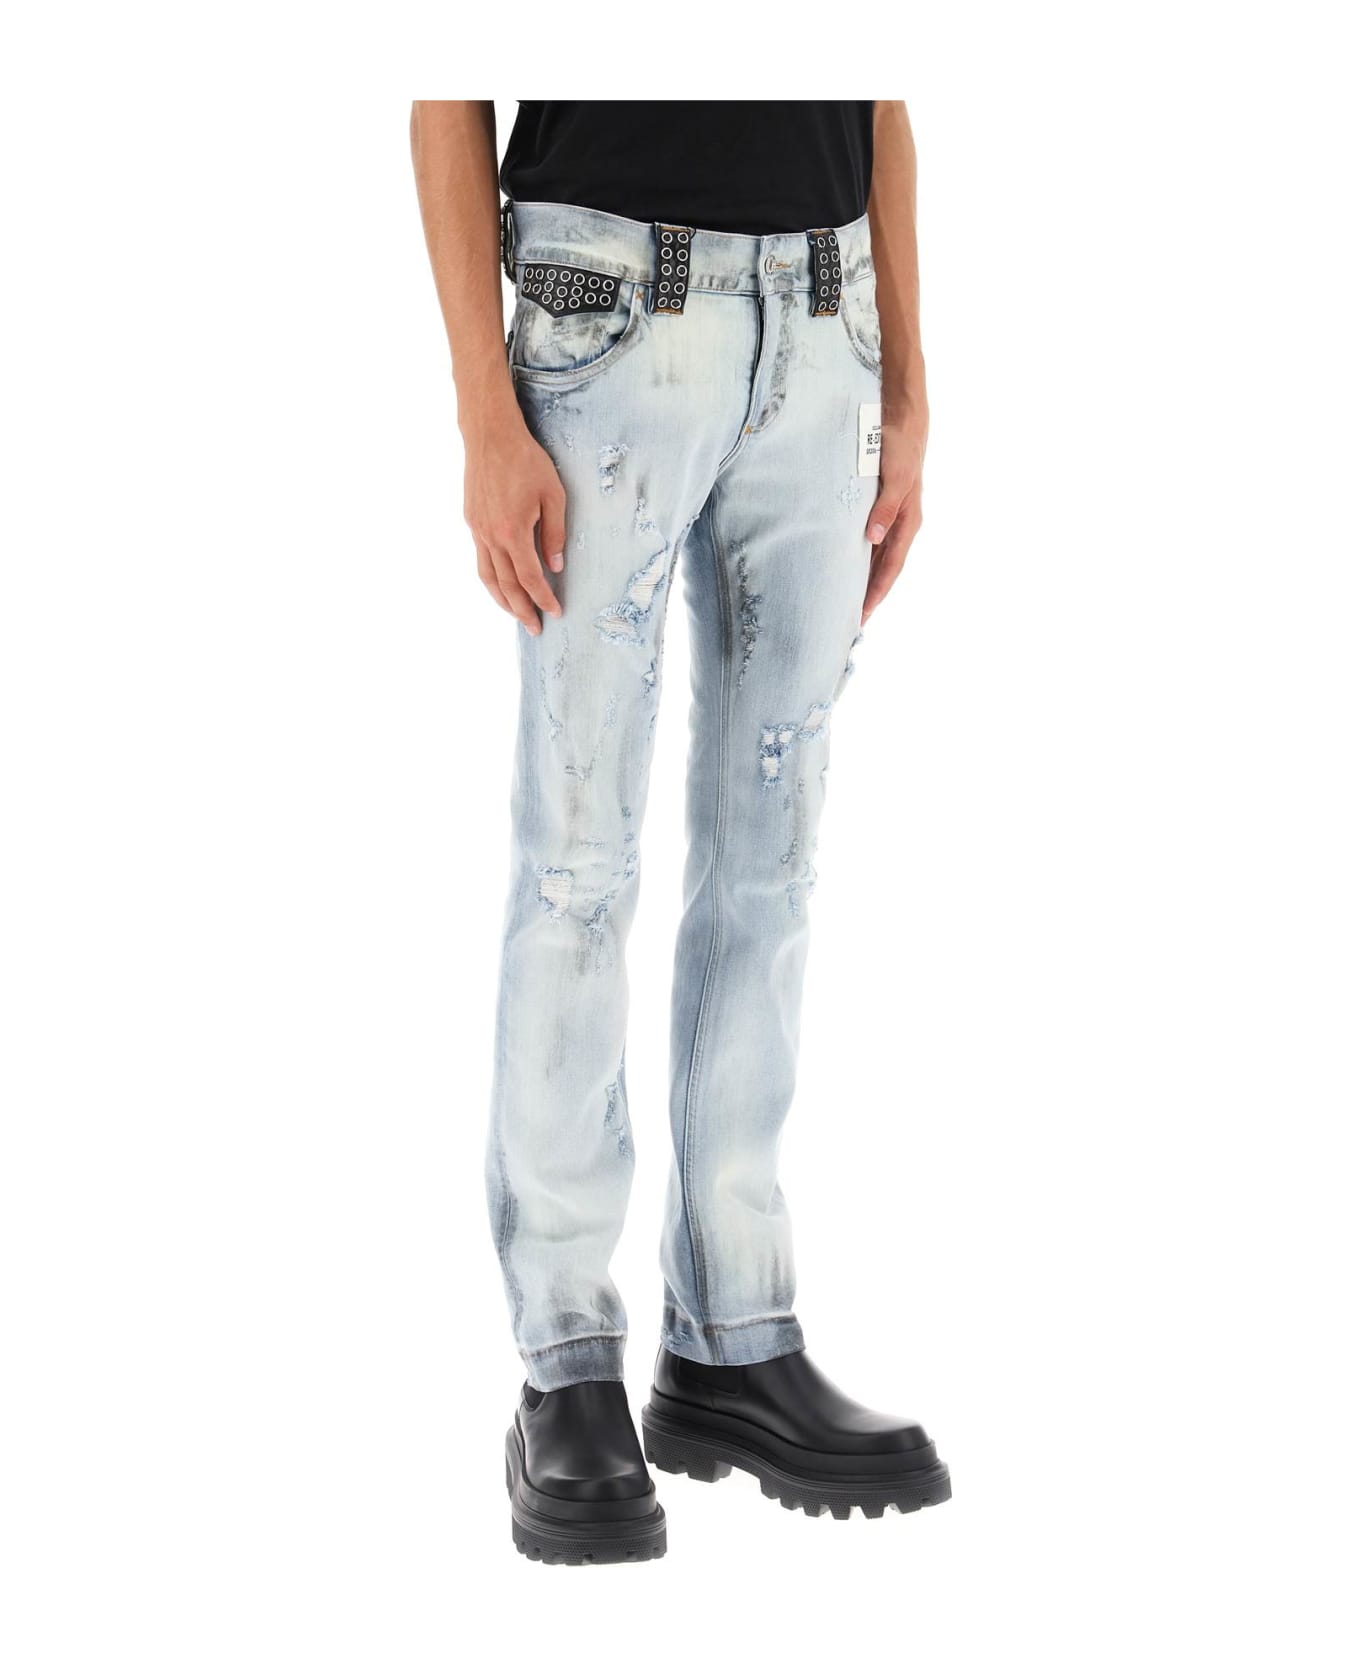 Dolce & Gabbana Re-edition Jeans With Leather Detailing - VARIANTE ABBINATA (Light blue) デニム